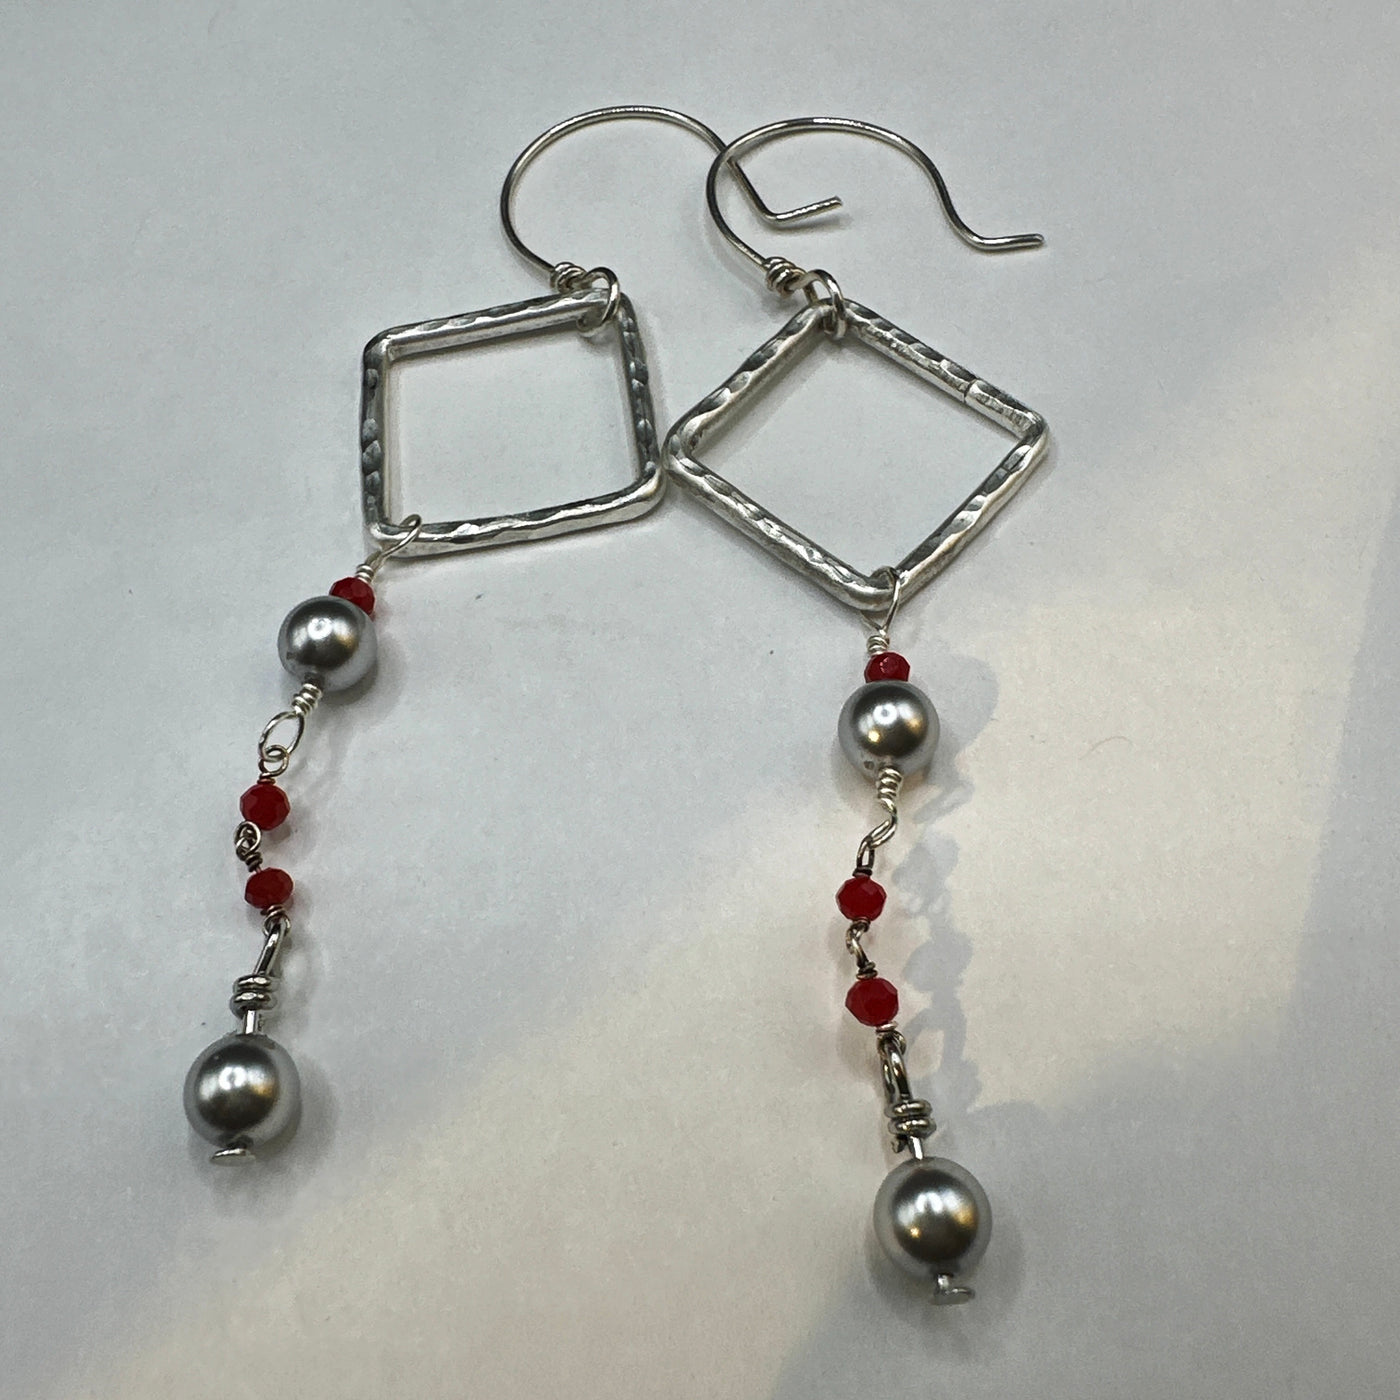 Earrings silver 925 with red beads and light grey pearls and a square silver insert